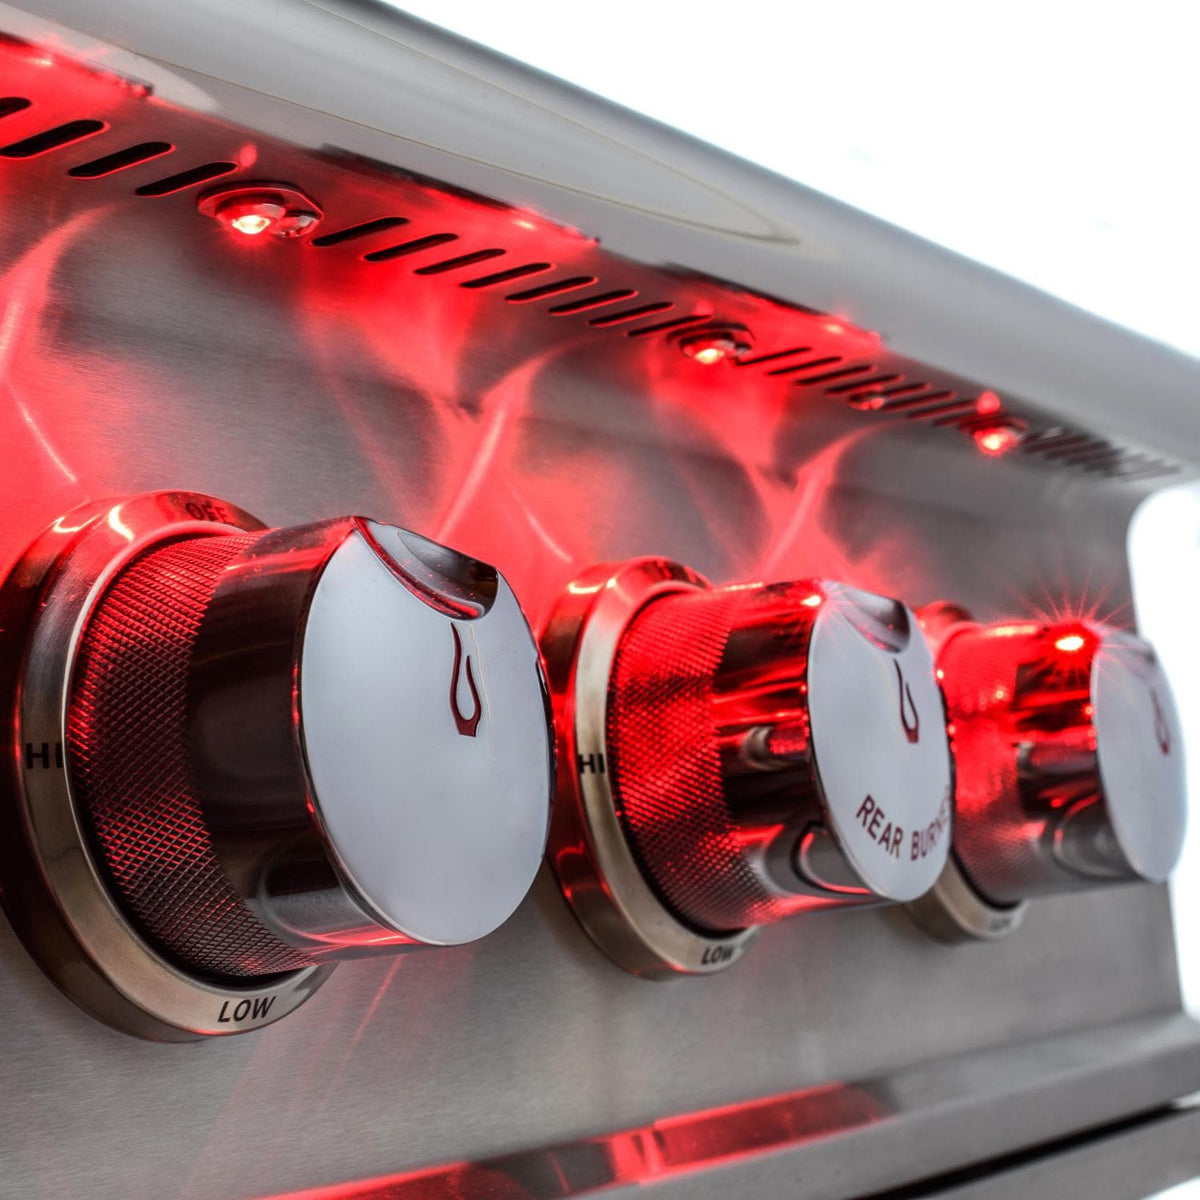 Blaze Professional 3 Burner 34 Inch Grill with Red LED Illuminated Knobs